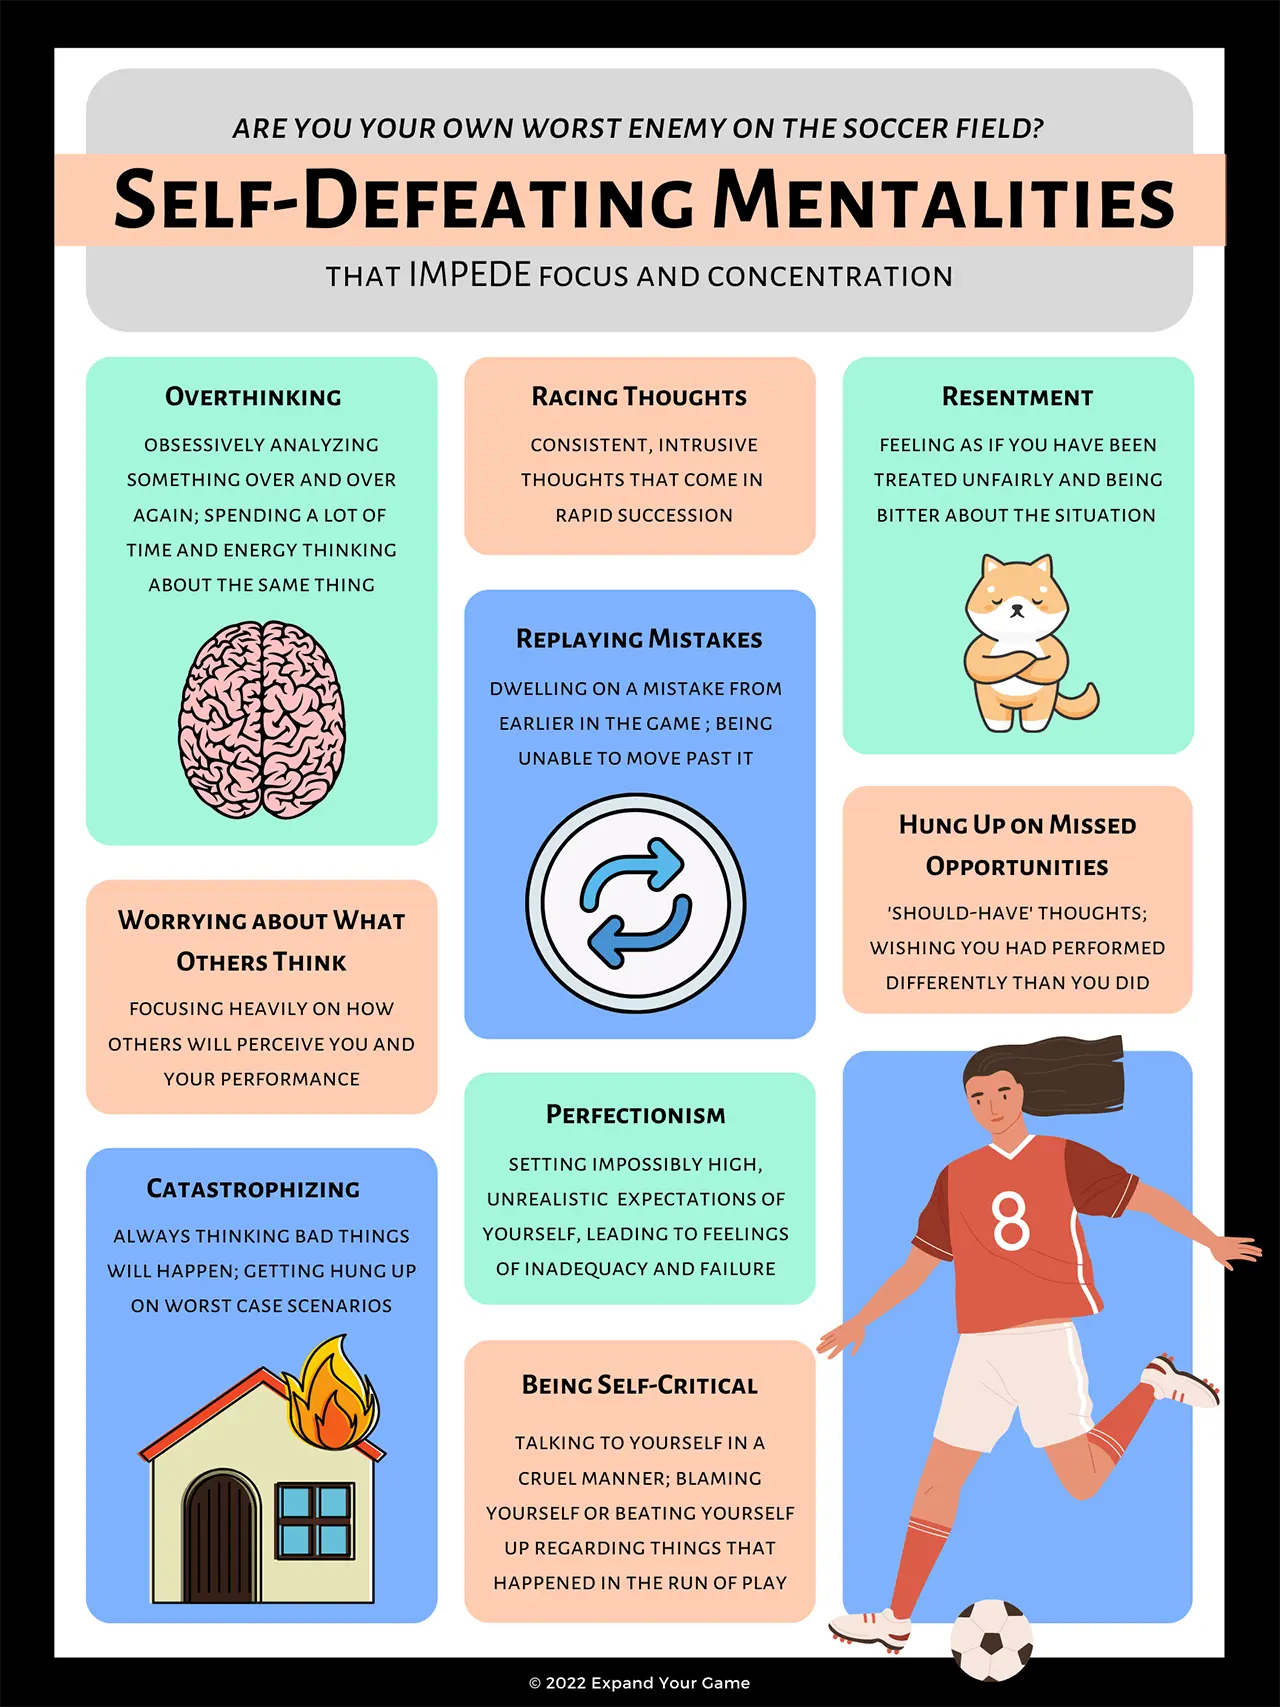 Are you your own worst enemy on the soccer field? Here are the most common self-defeating mentalities that impede focus and concentration on the soccer field